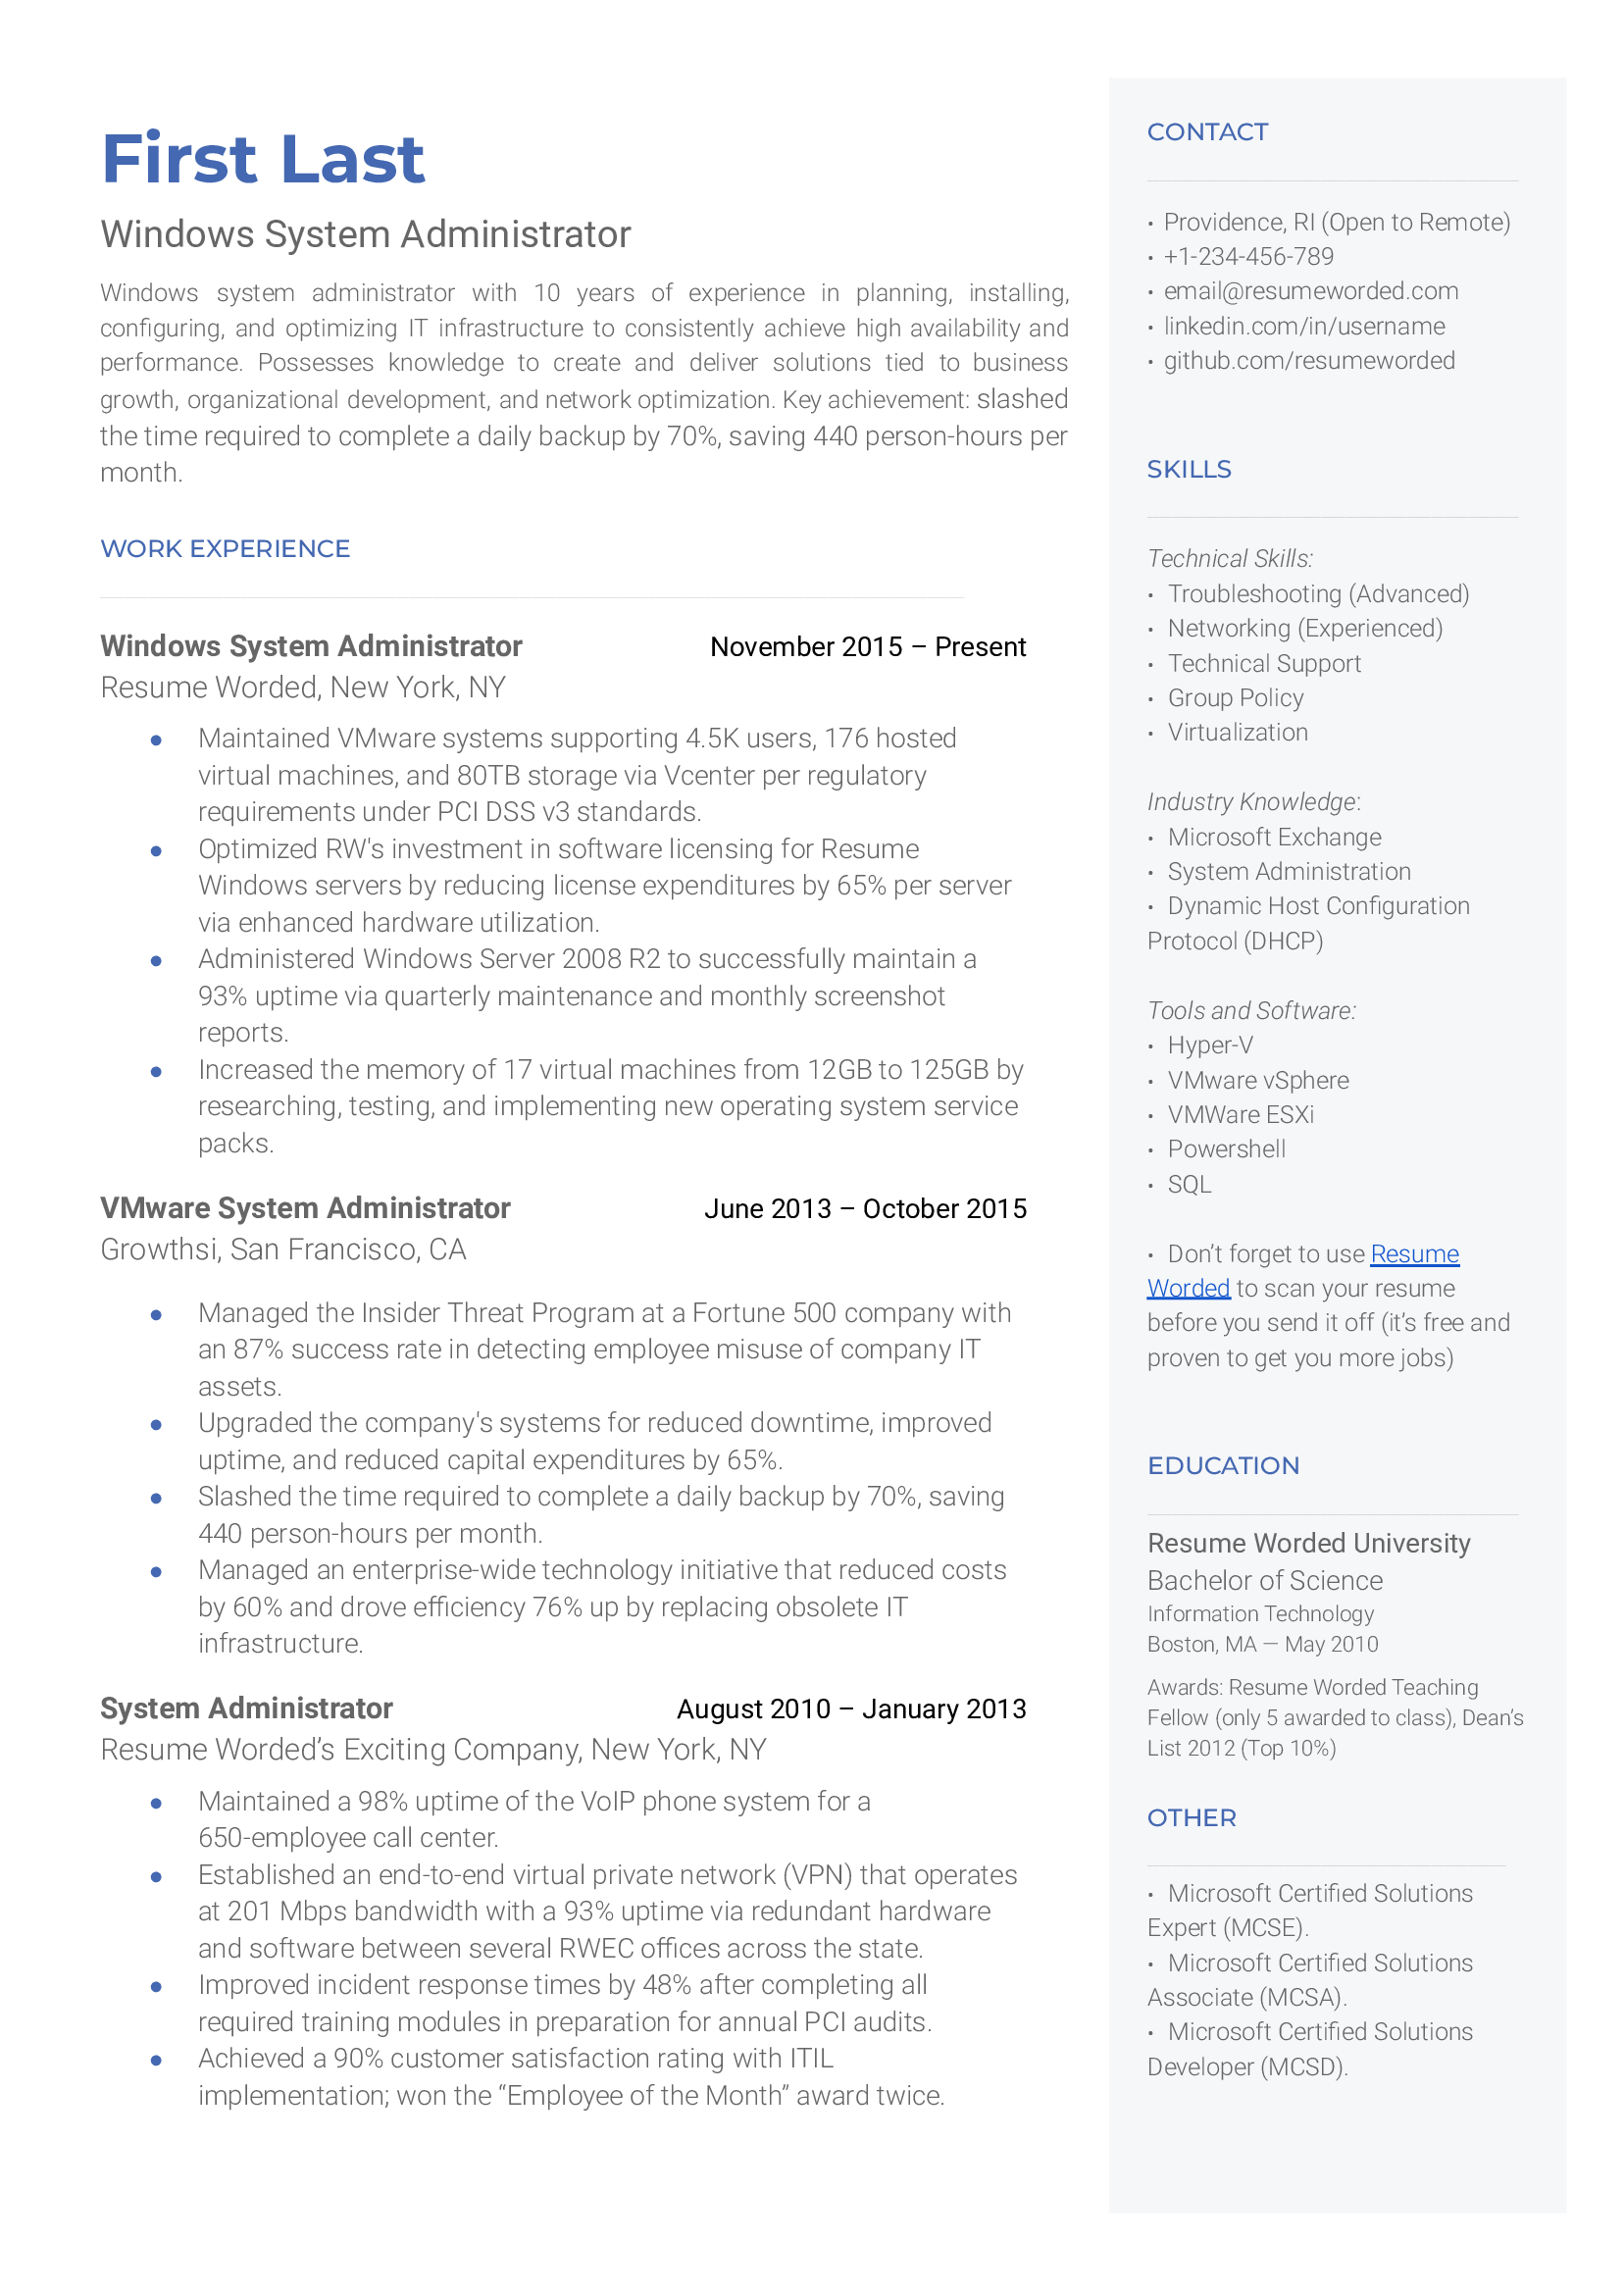 A Windows system administrator resume sample that highlights the applicant's certifications and experience.